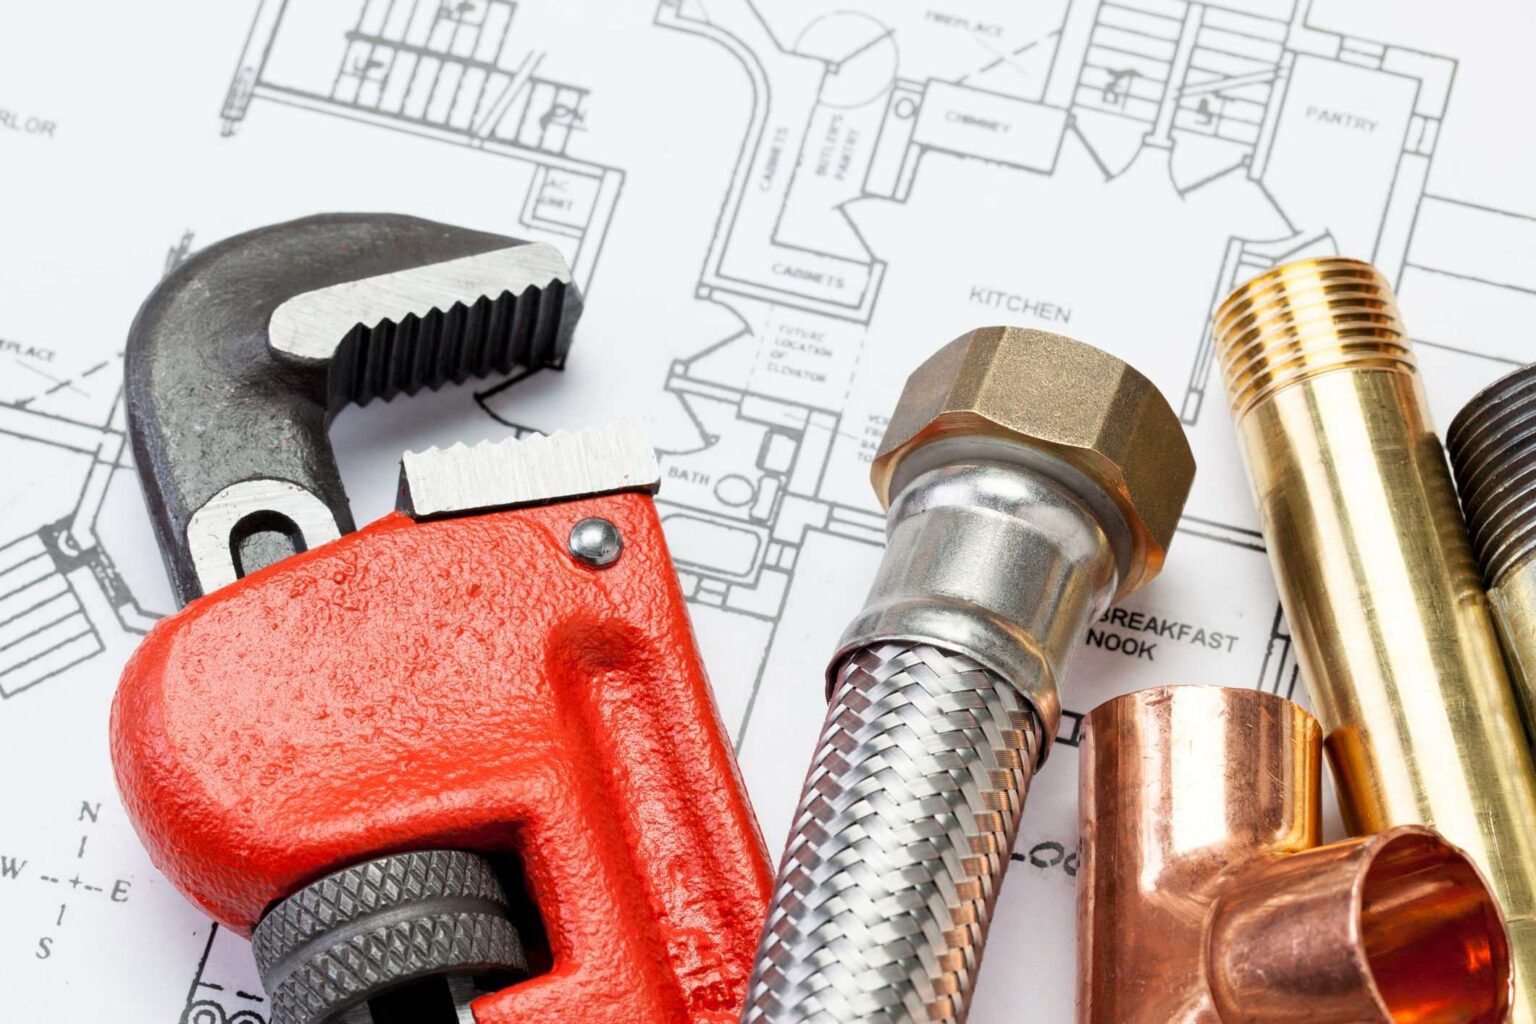 Plumbing is an essential part of maintaining a home. Here are some frequently asked questions about plumbing.